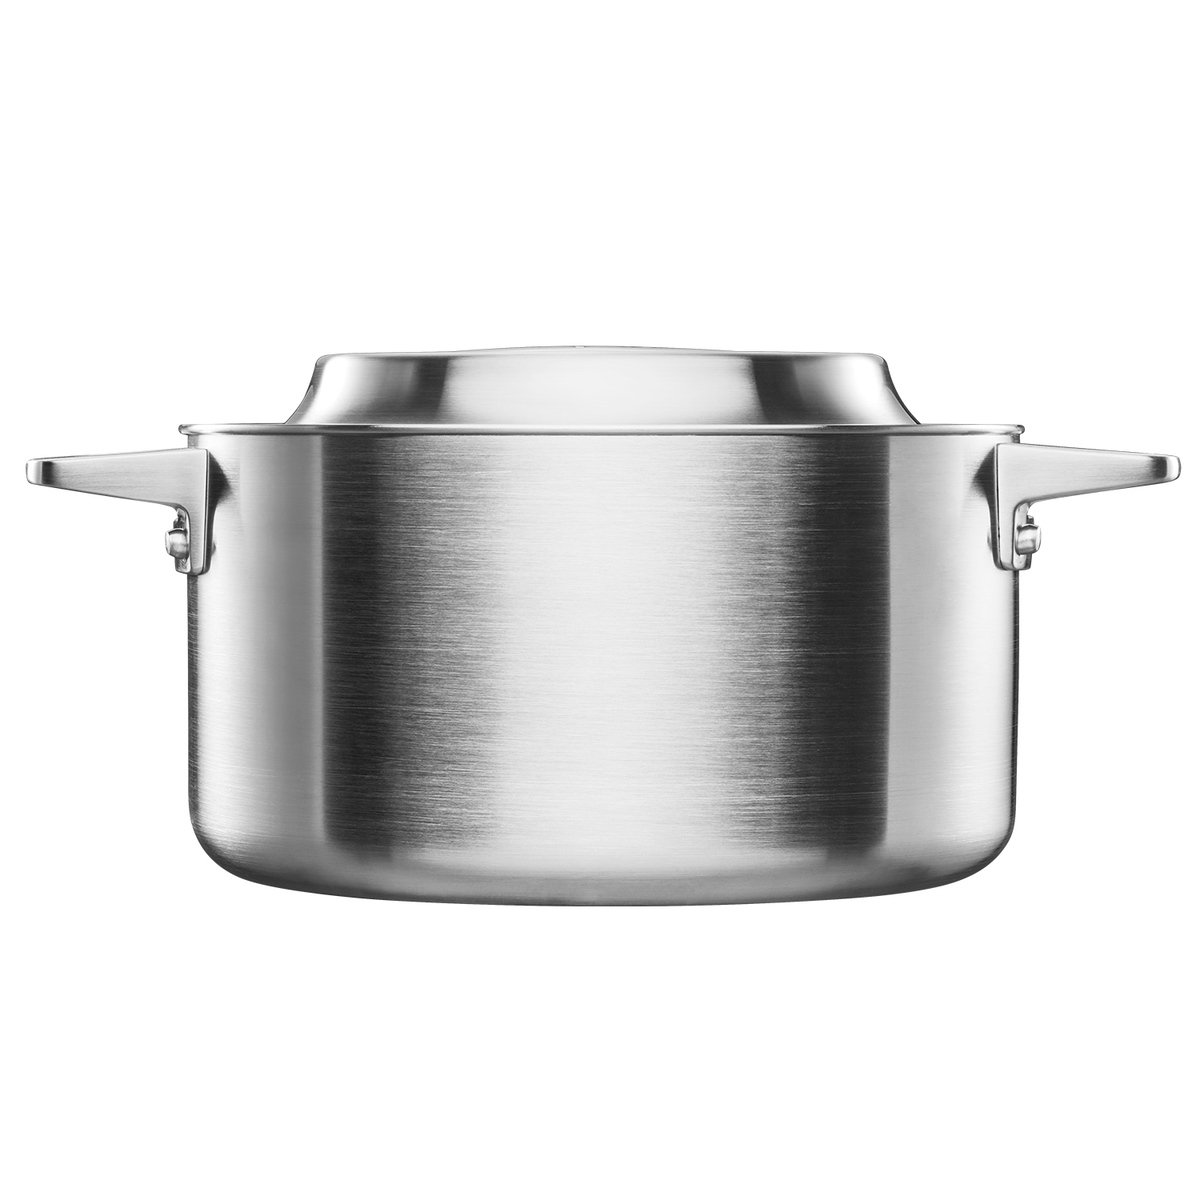 stainless steel/plastic capacity: 3.0 litres Ø 22 cm suitable for all hobs Functional Form 1026577 Fiskars Casserole with Lid